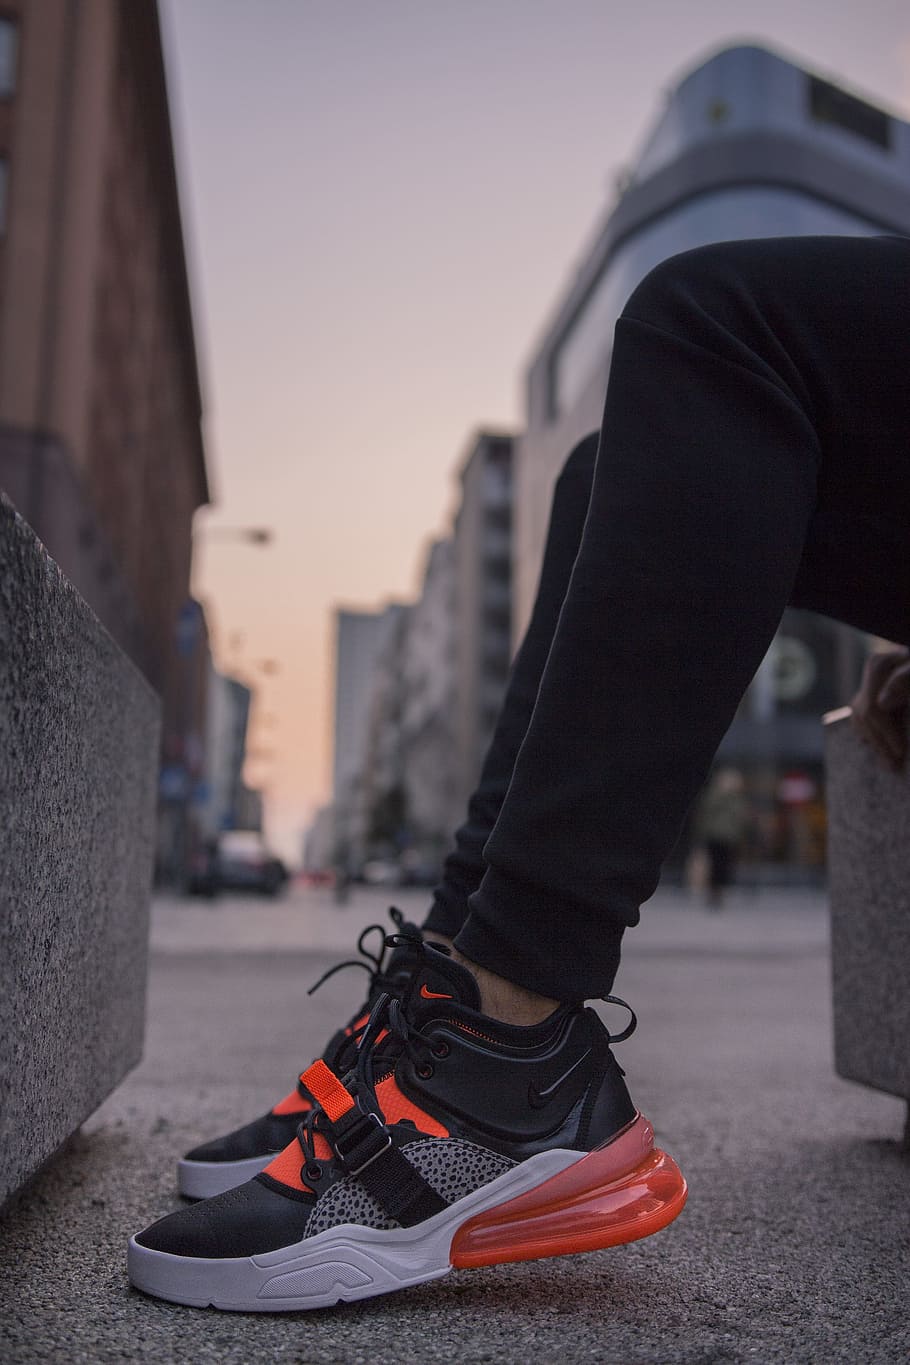 HD Wallpaper: Person Wearing Black And Gray Nike Air Max 270 Shoes